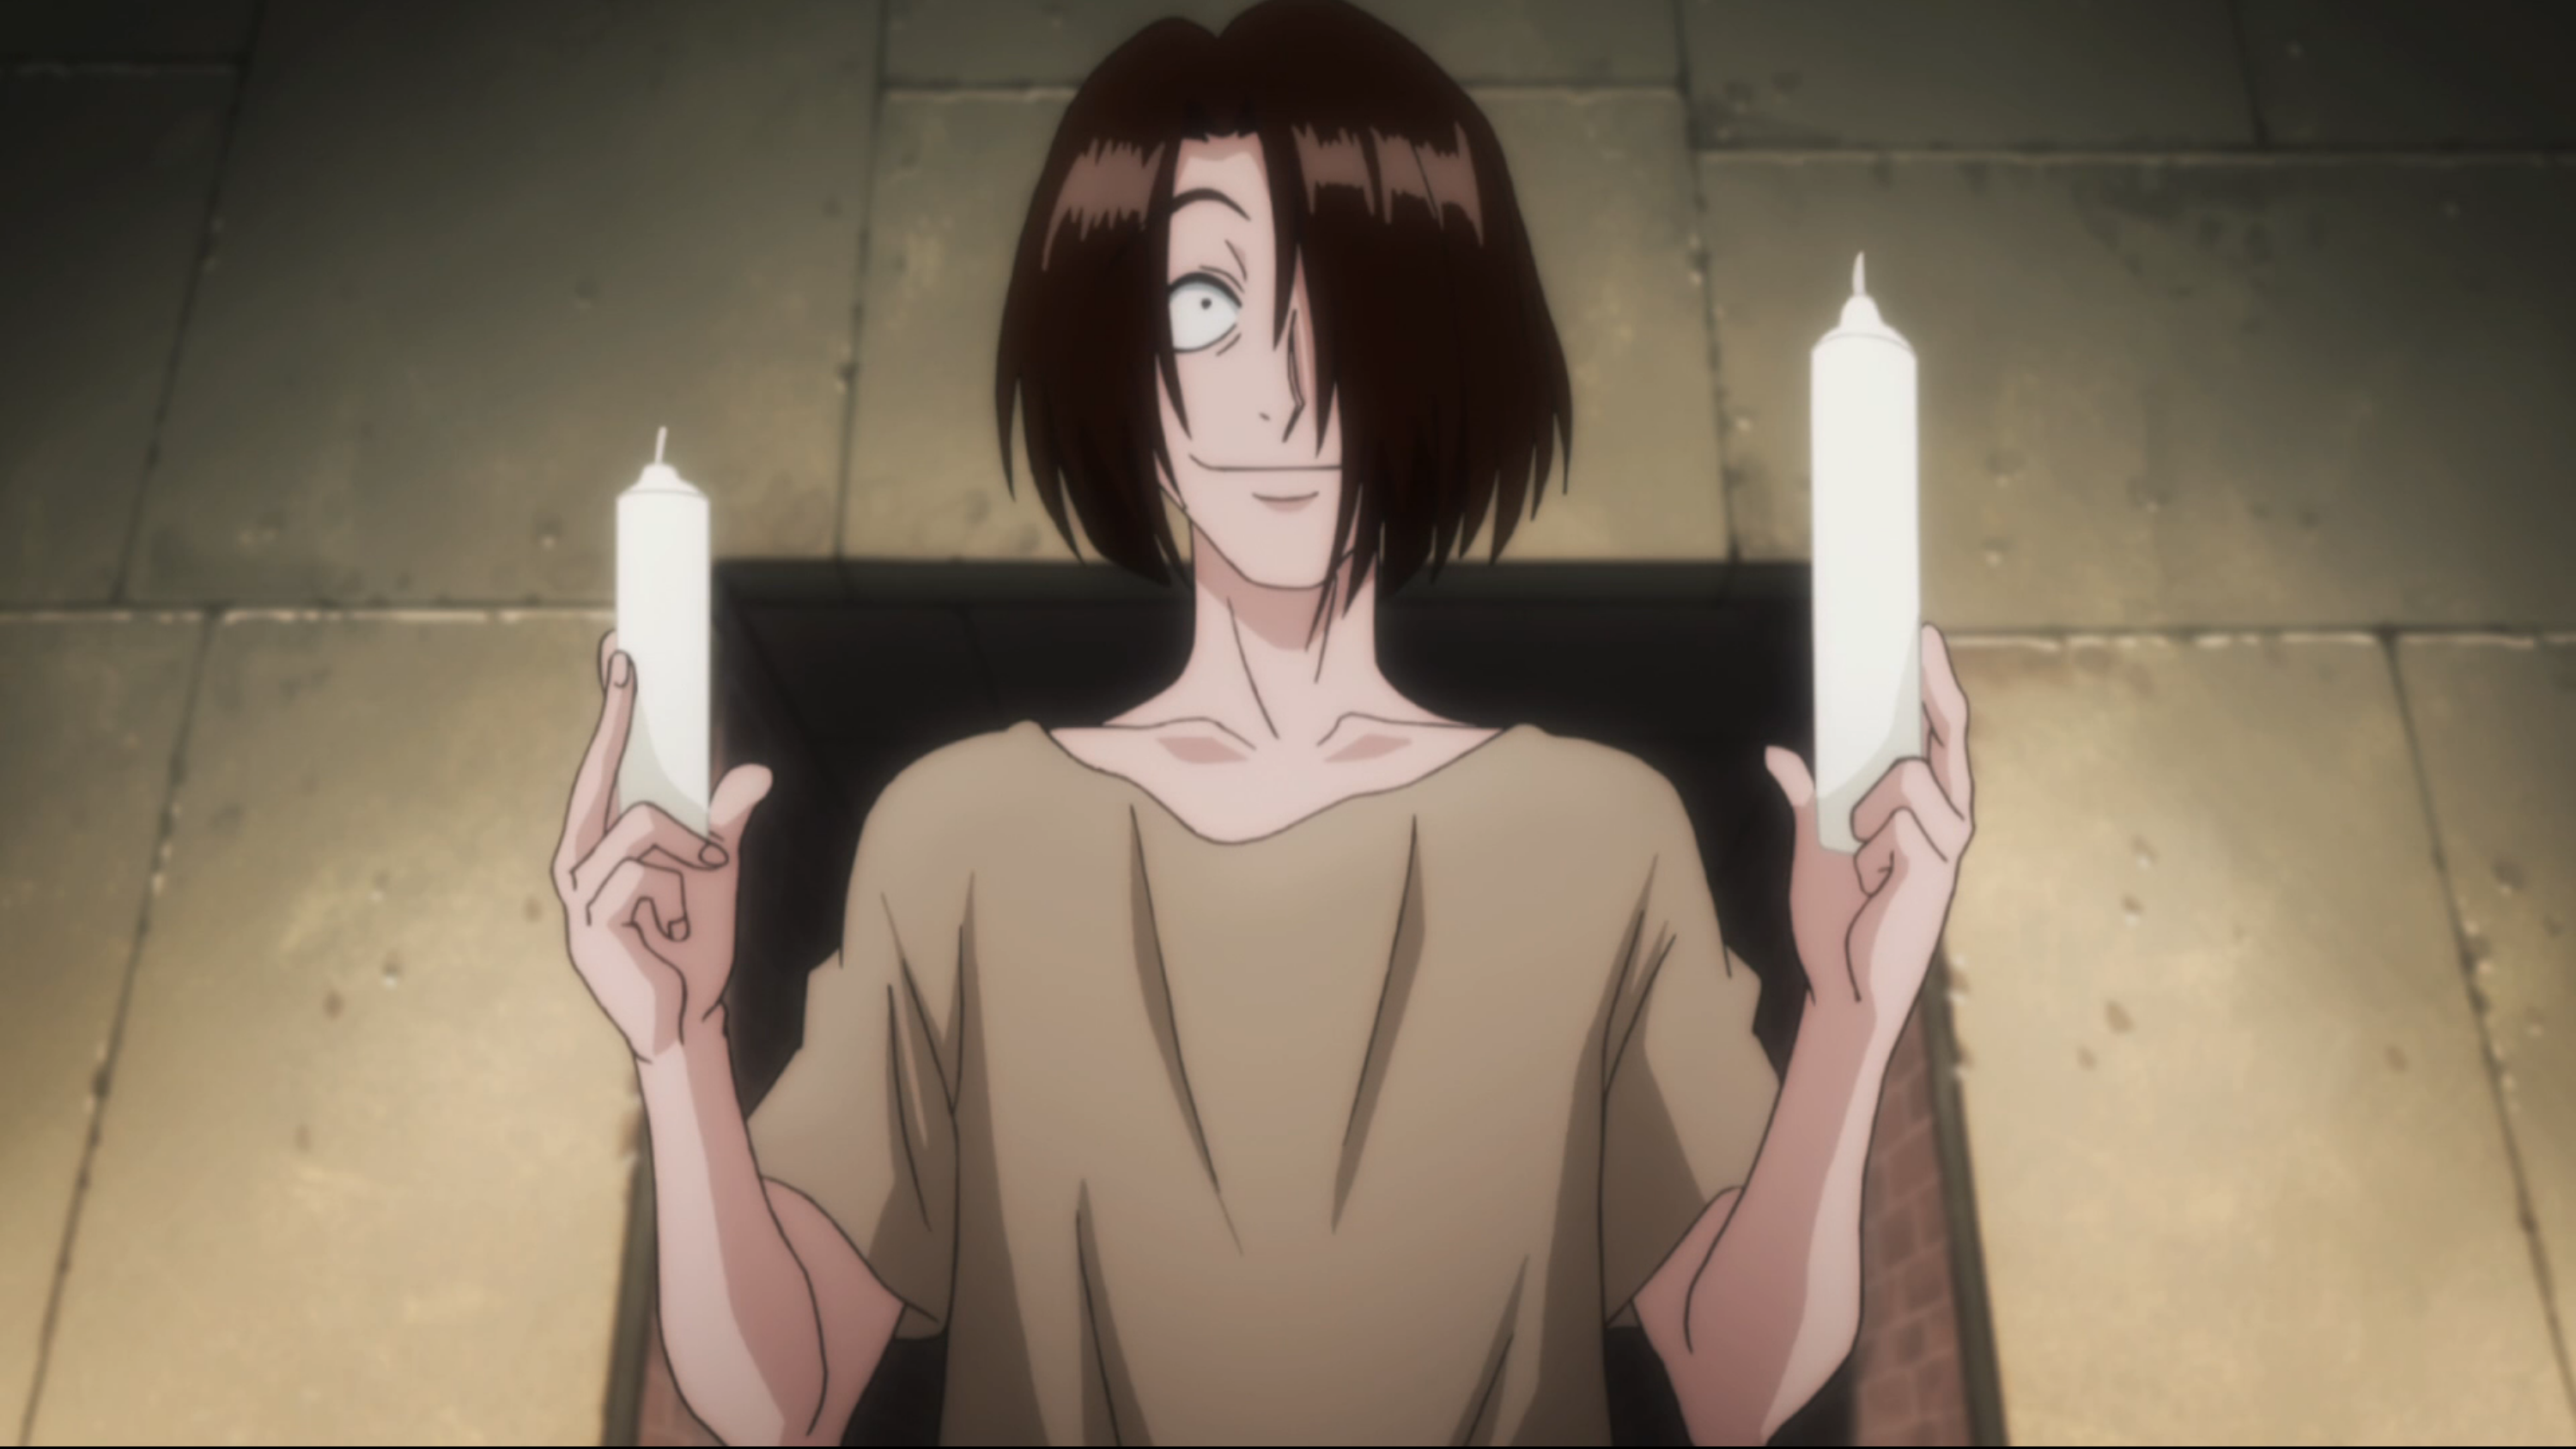 Smiling deviously, Sedokan offers a short candle and a long candle (Togashi, Yoshihiro, creator. Hunter x Hunter. 2011-2014. Madhouse.).